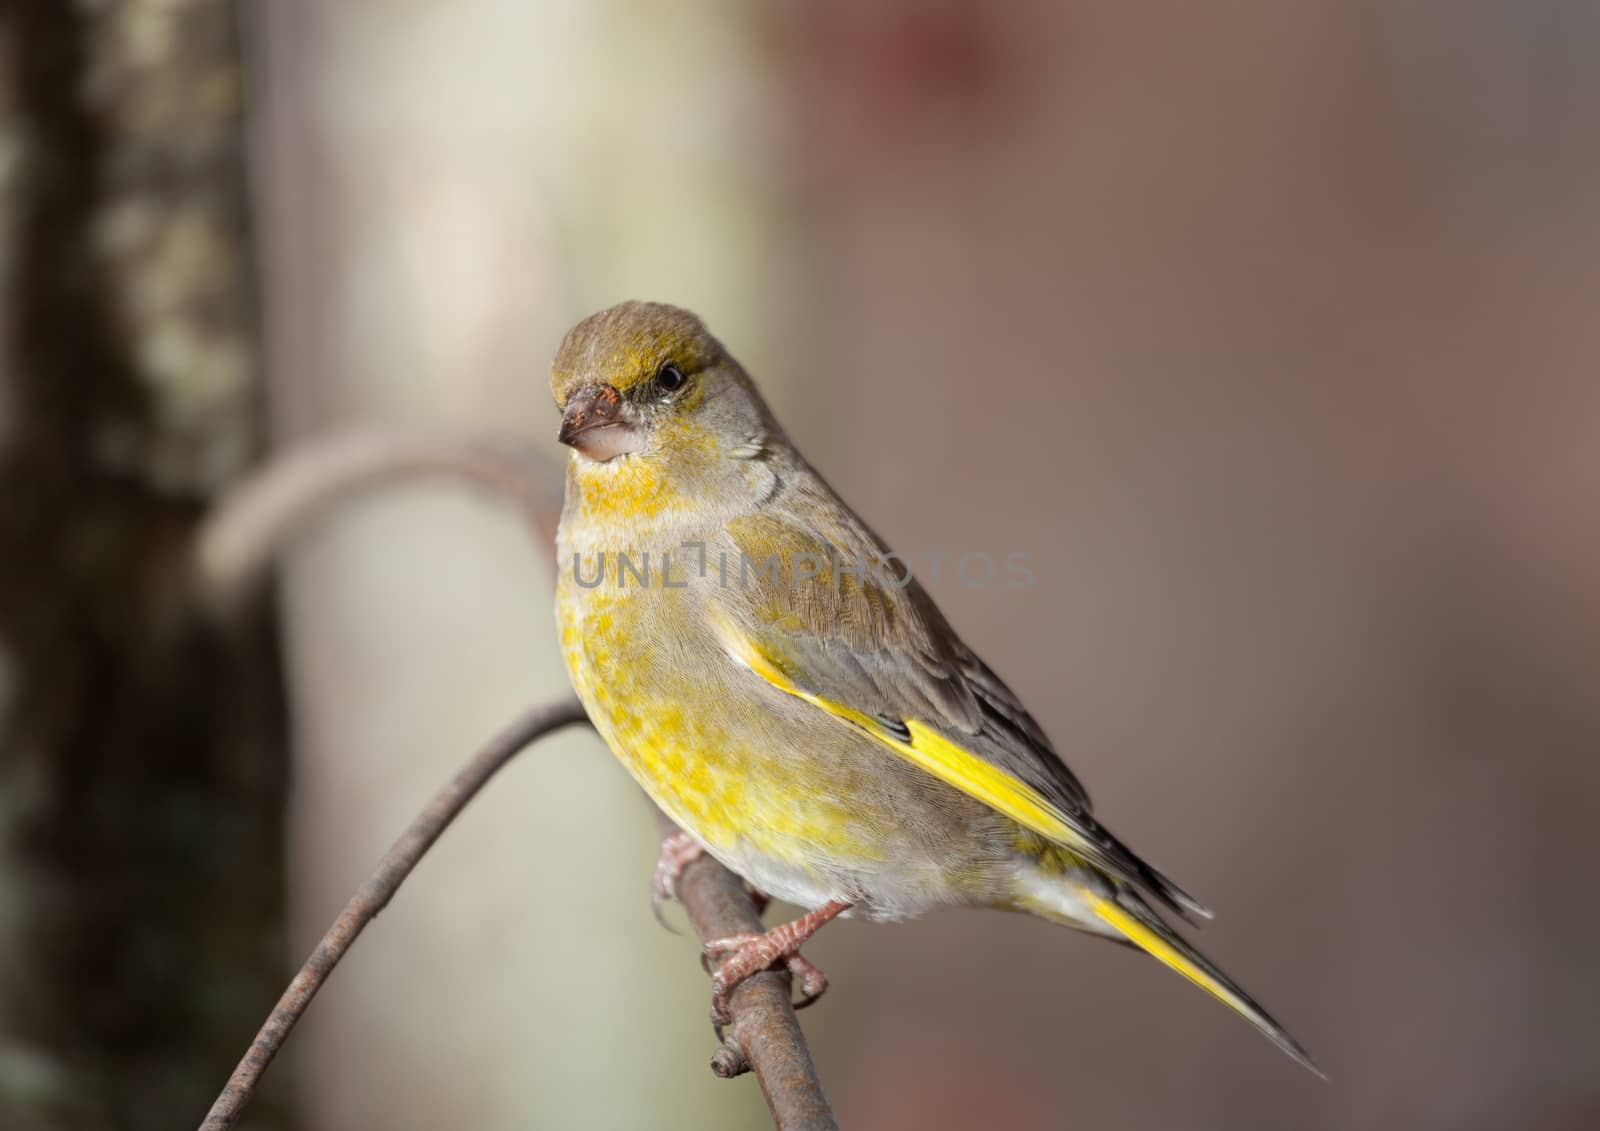 The greenfinch sits on a mountain ash branch in rainy winter day